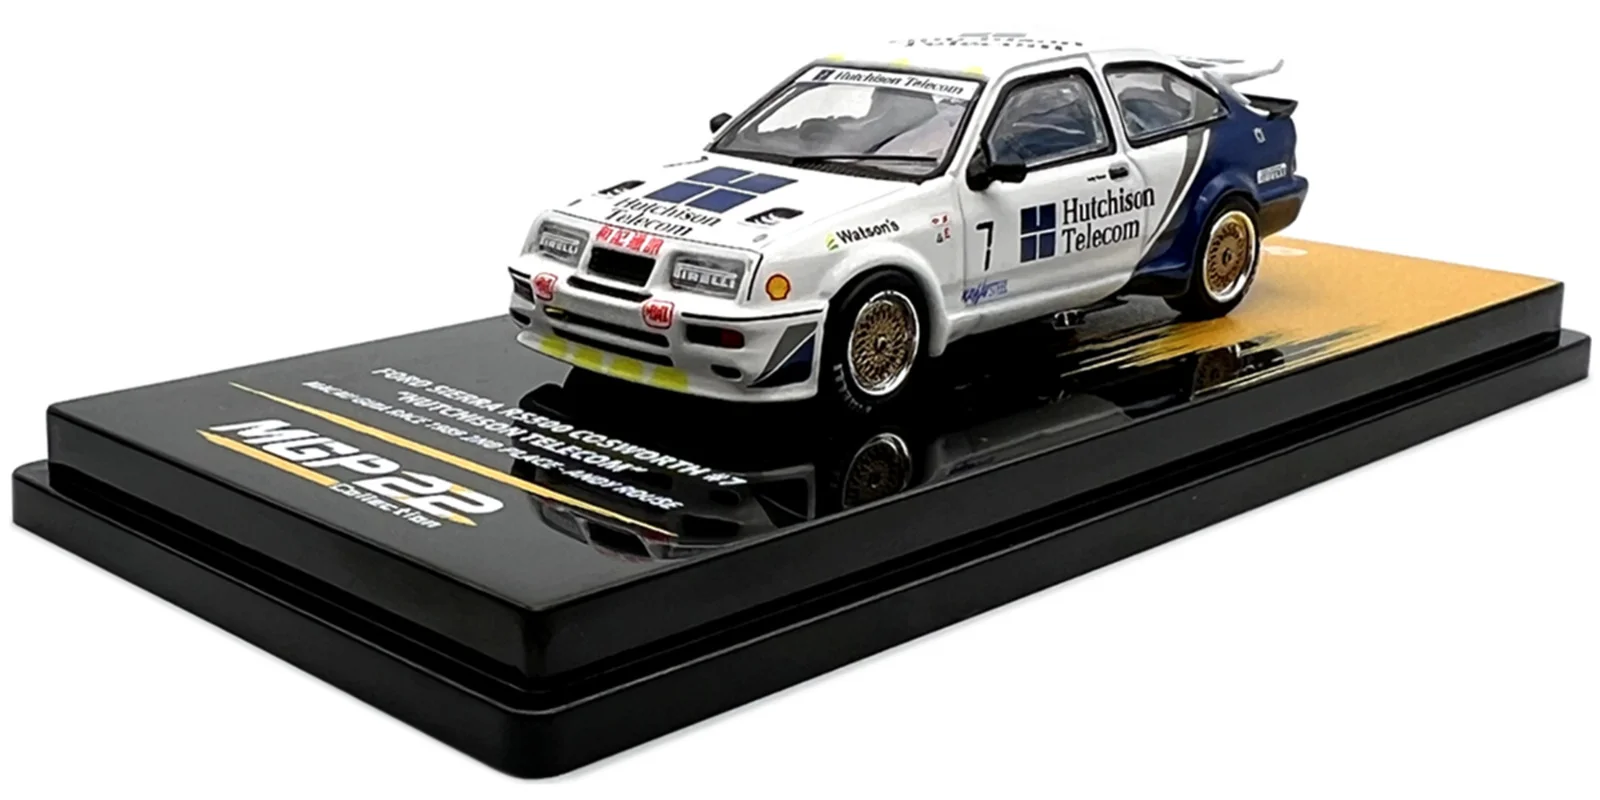 

Inno 1/64 Sierra RS500 Cosworth Macau Guia Race 1989 2nd Place #7 Diecast Model Car Collection Limited Edition Hobby Toys